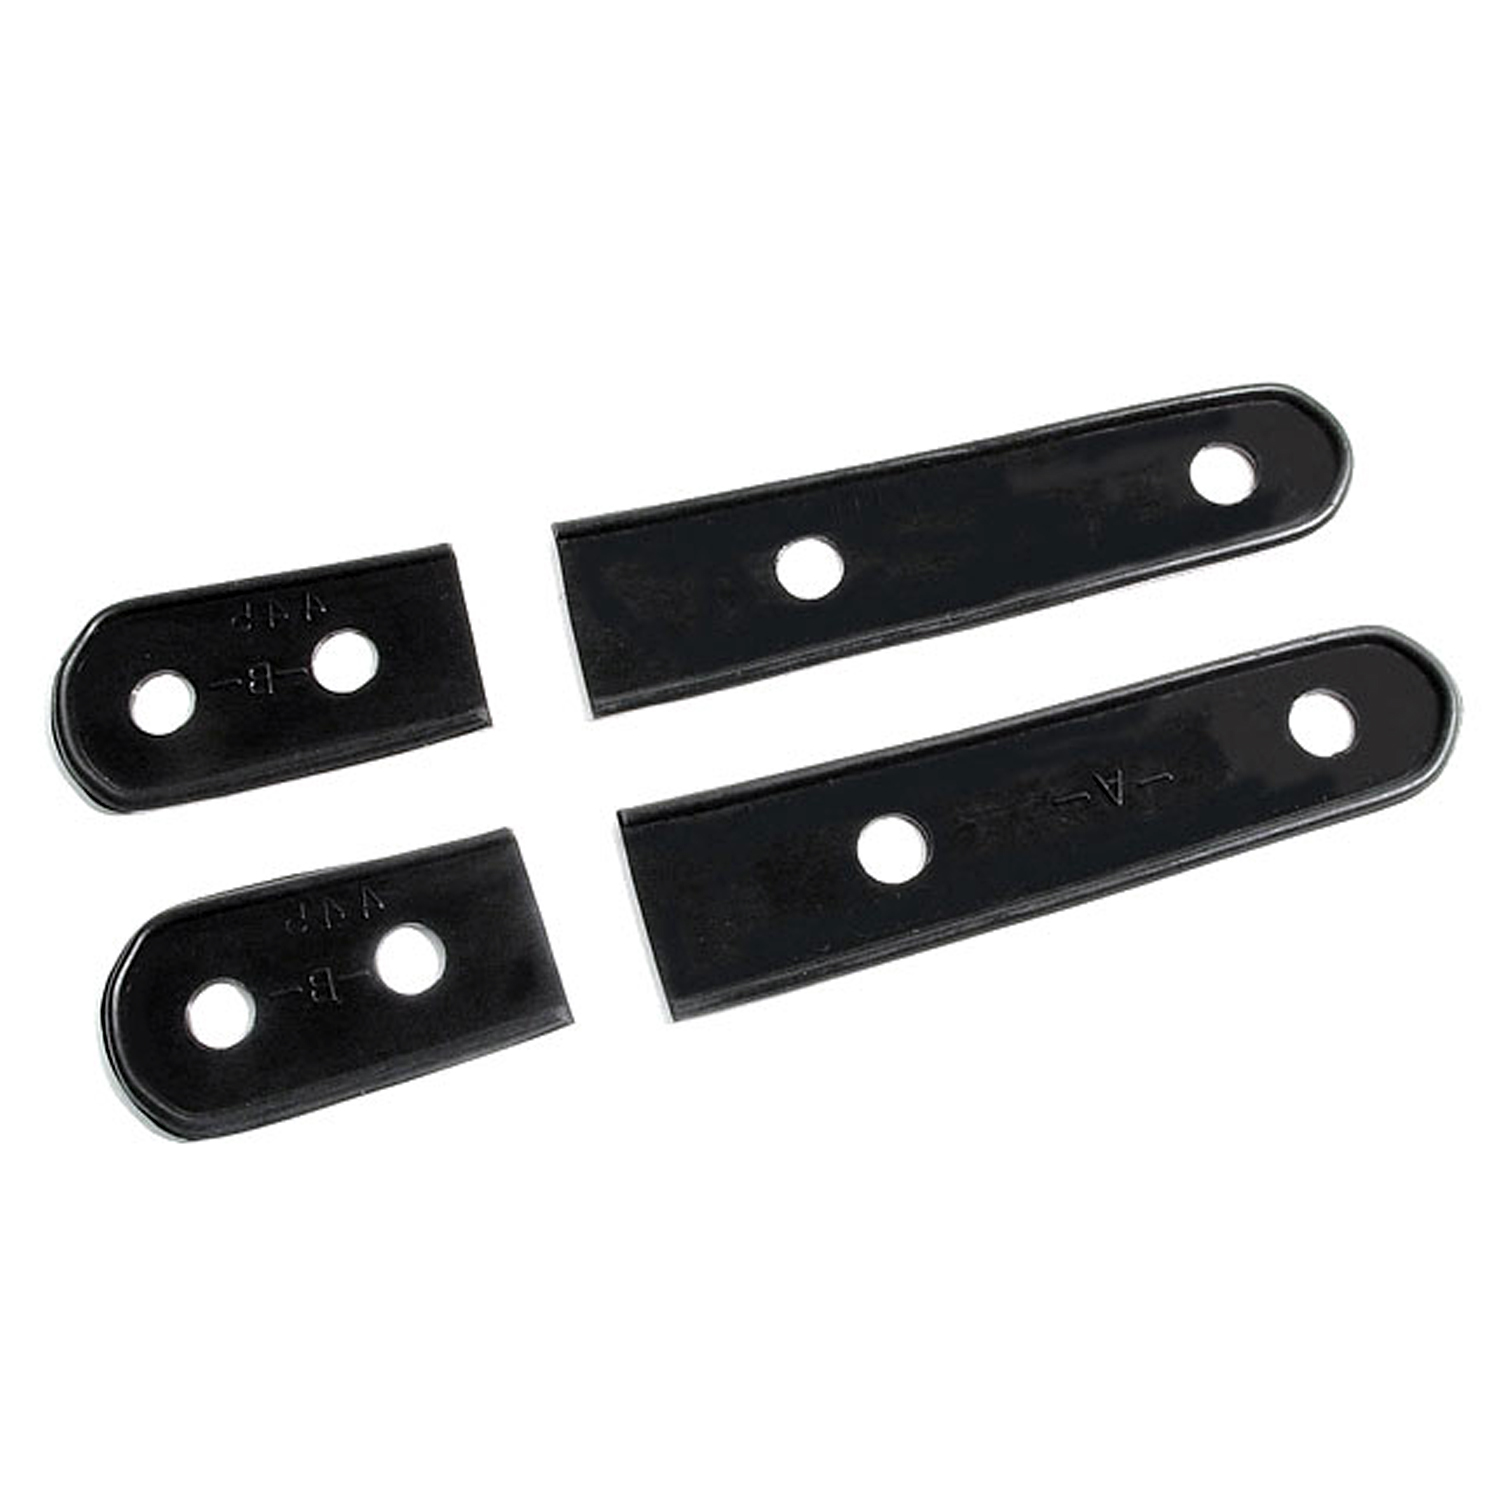 1940 Cadillac Series 75 Trunk Hinge Pads.  1-3/8 wide X 8 long.  4-Piece Set-MP 445